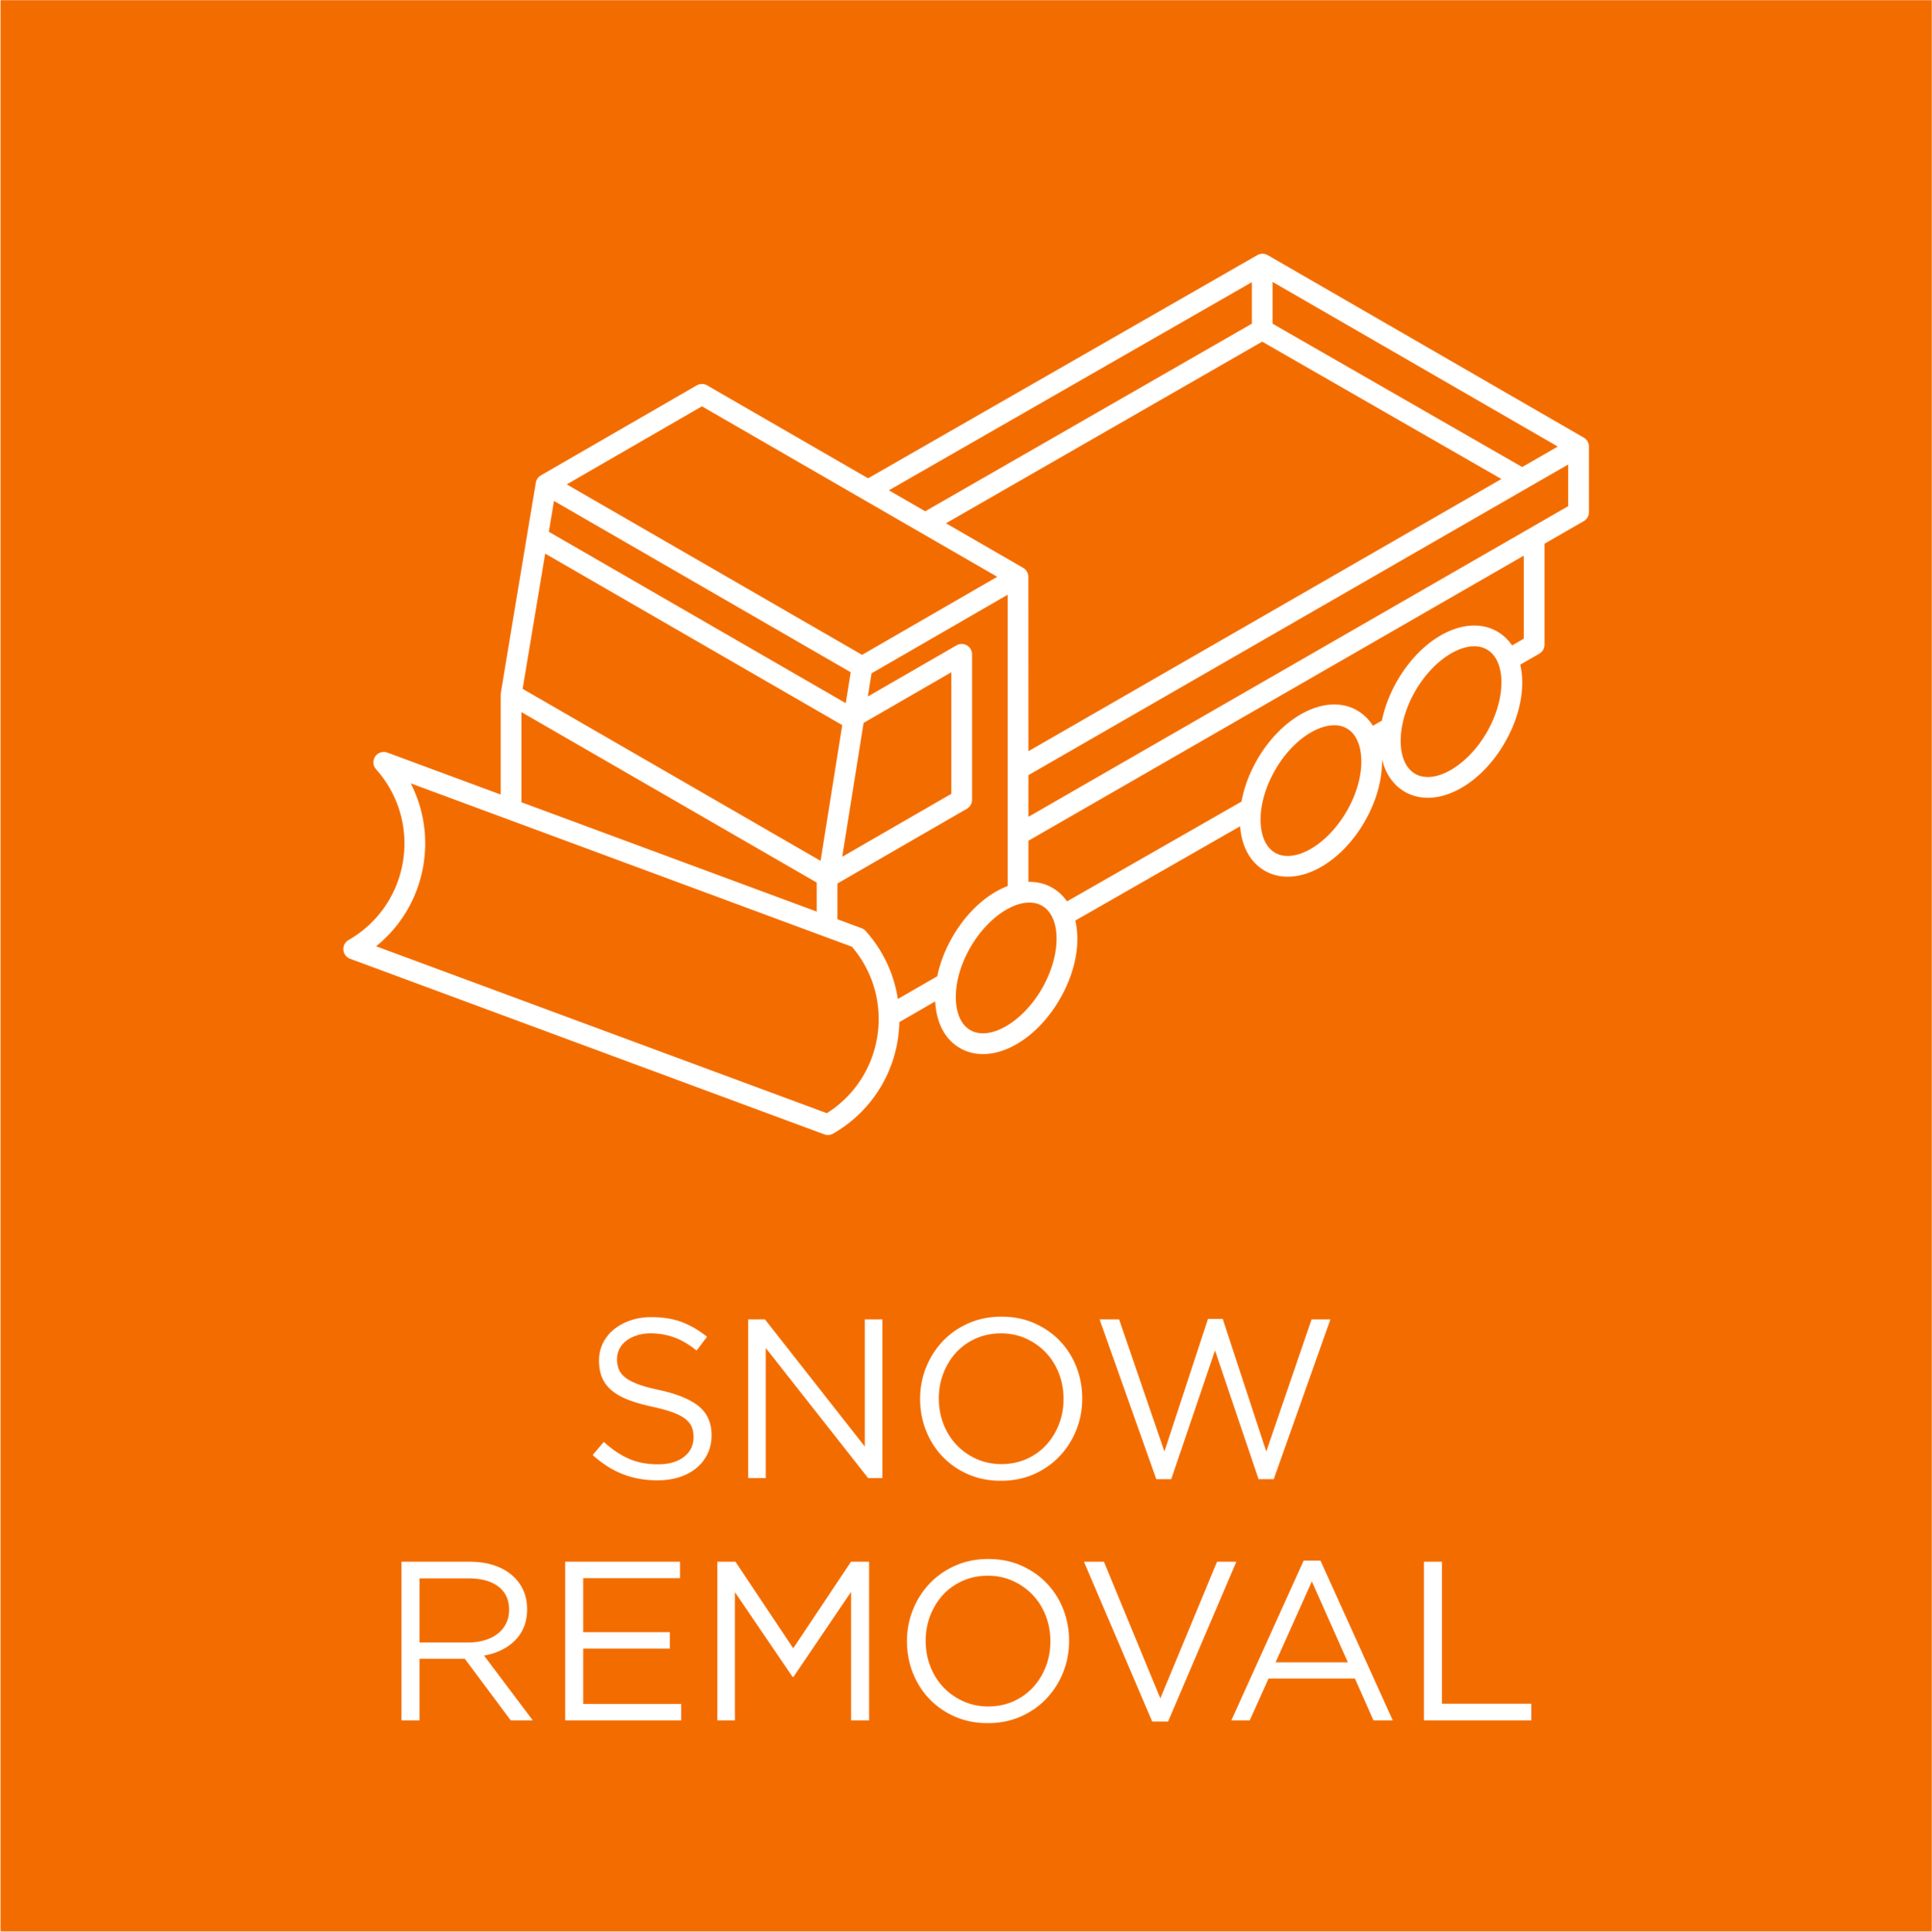 SNOW REMOVAL.png